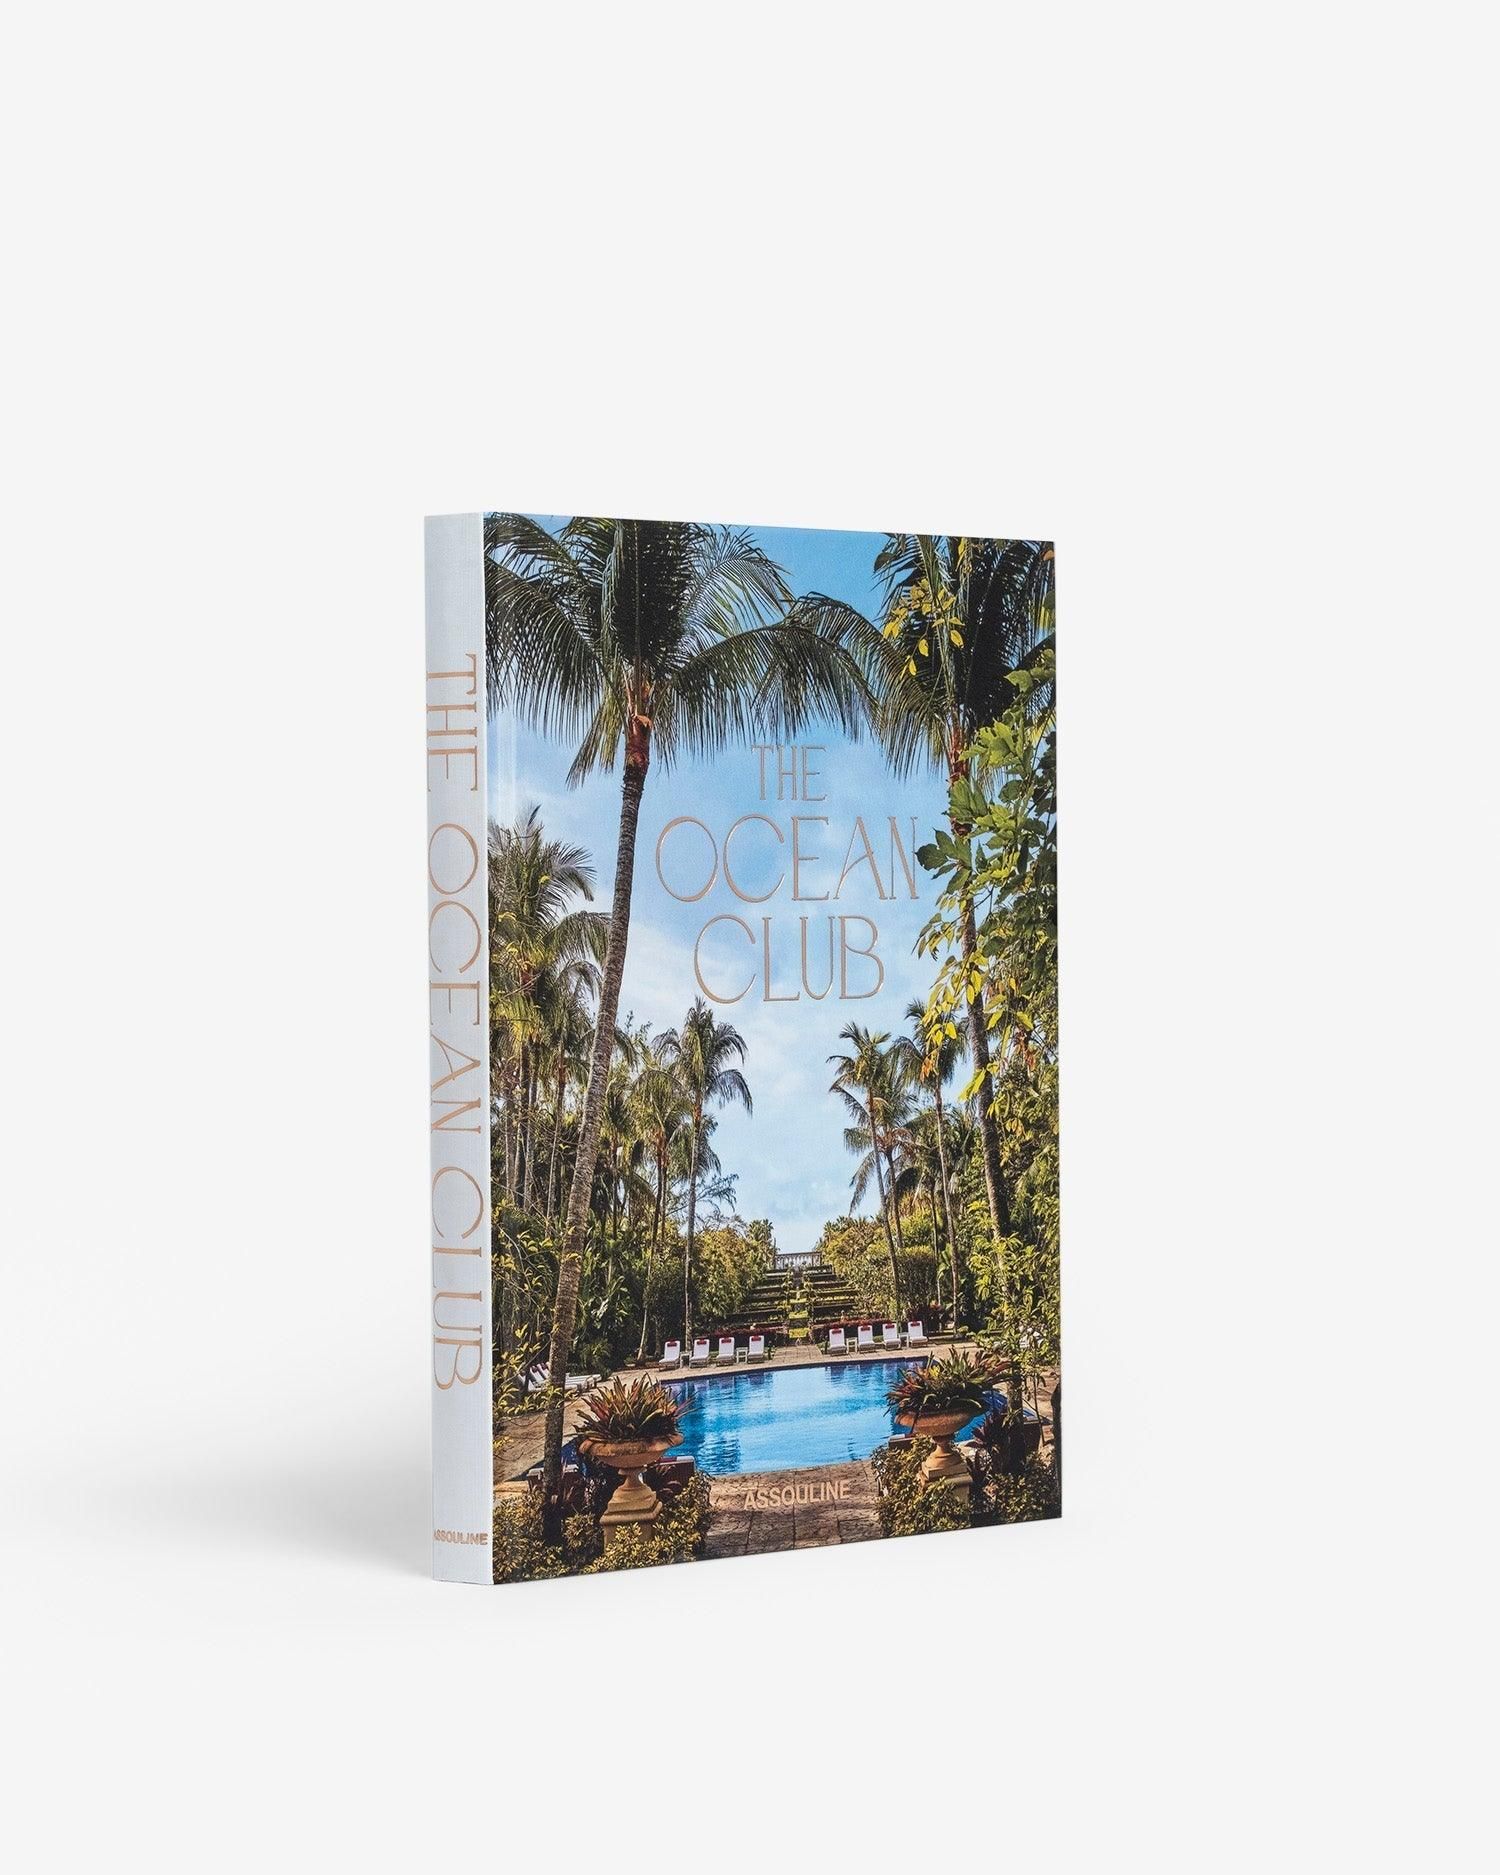 The Ocean Club by James Reginato - Coffee Table Book | ASSOULINE | Assouline